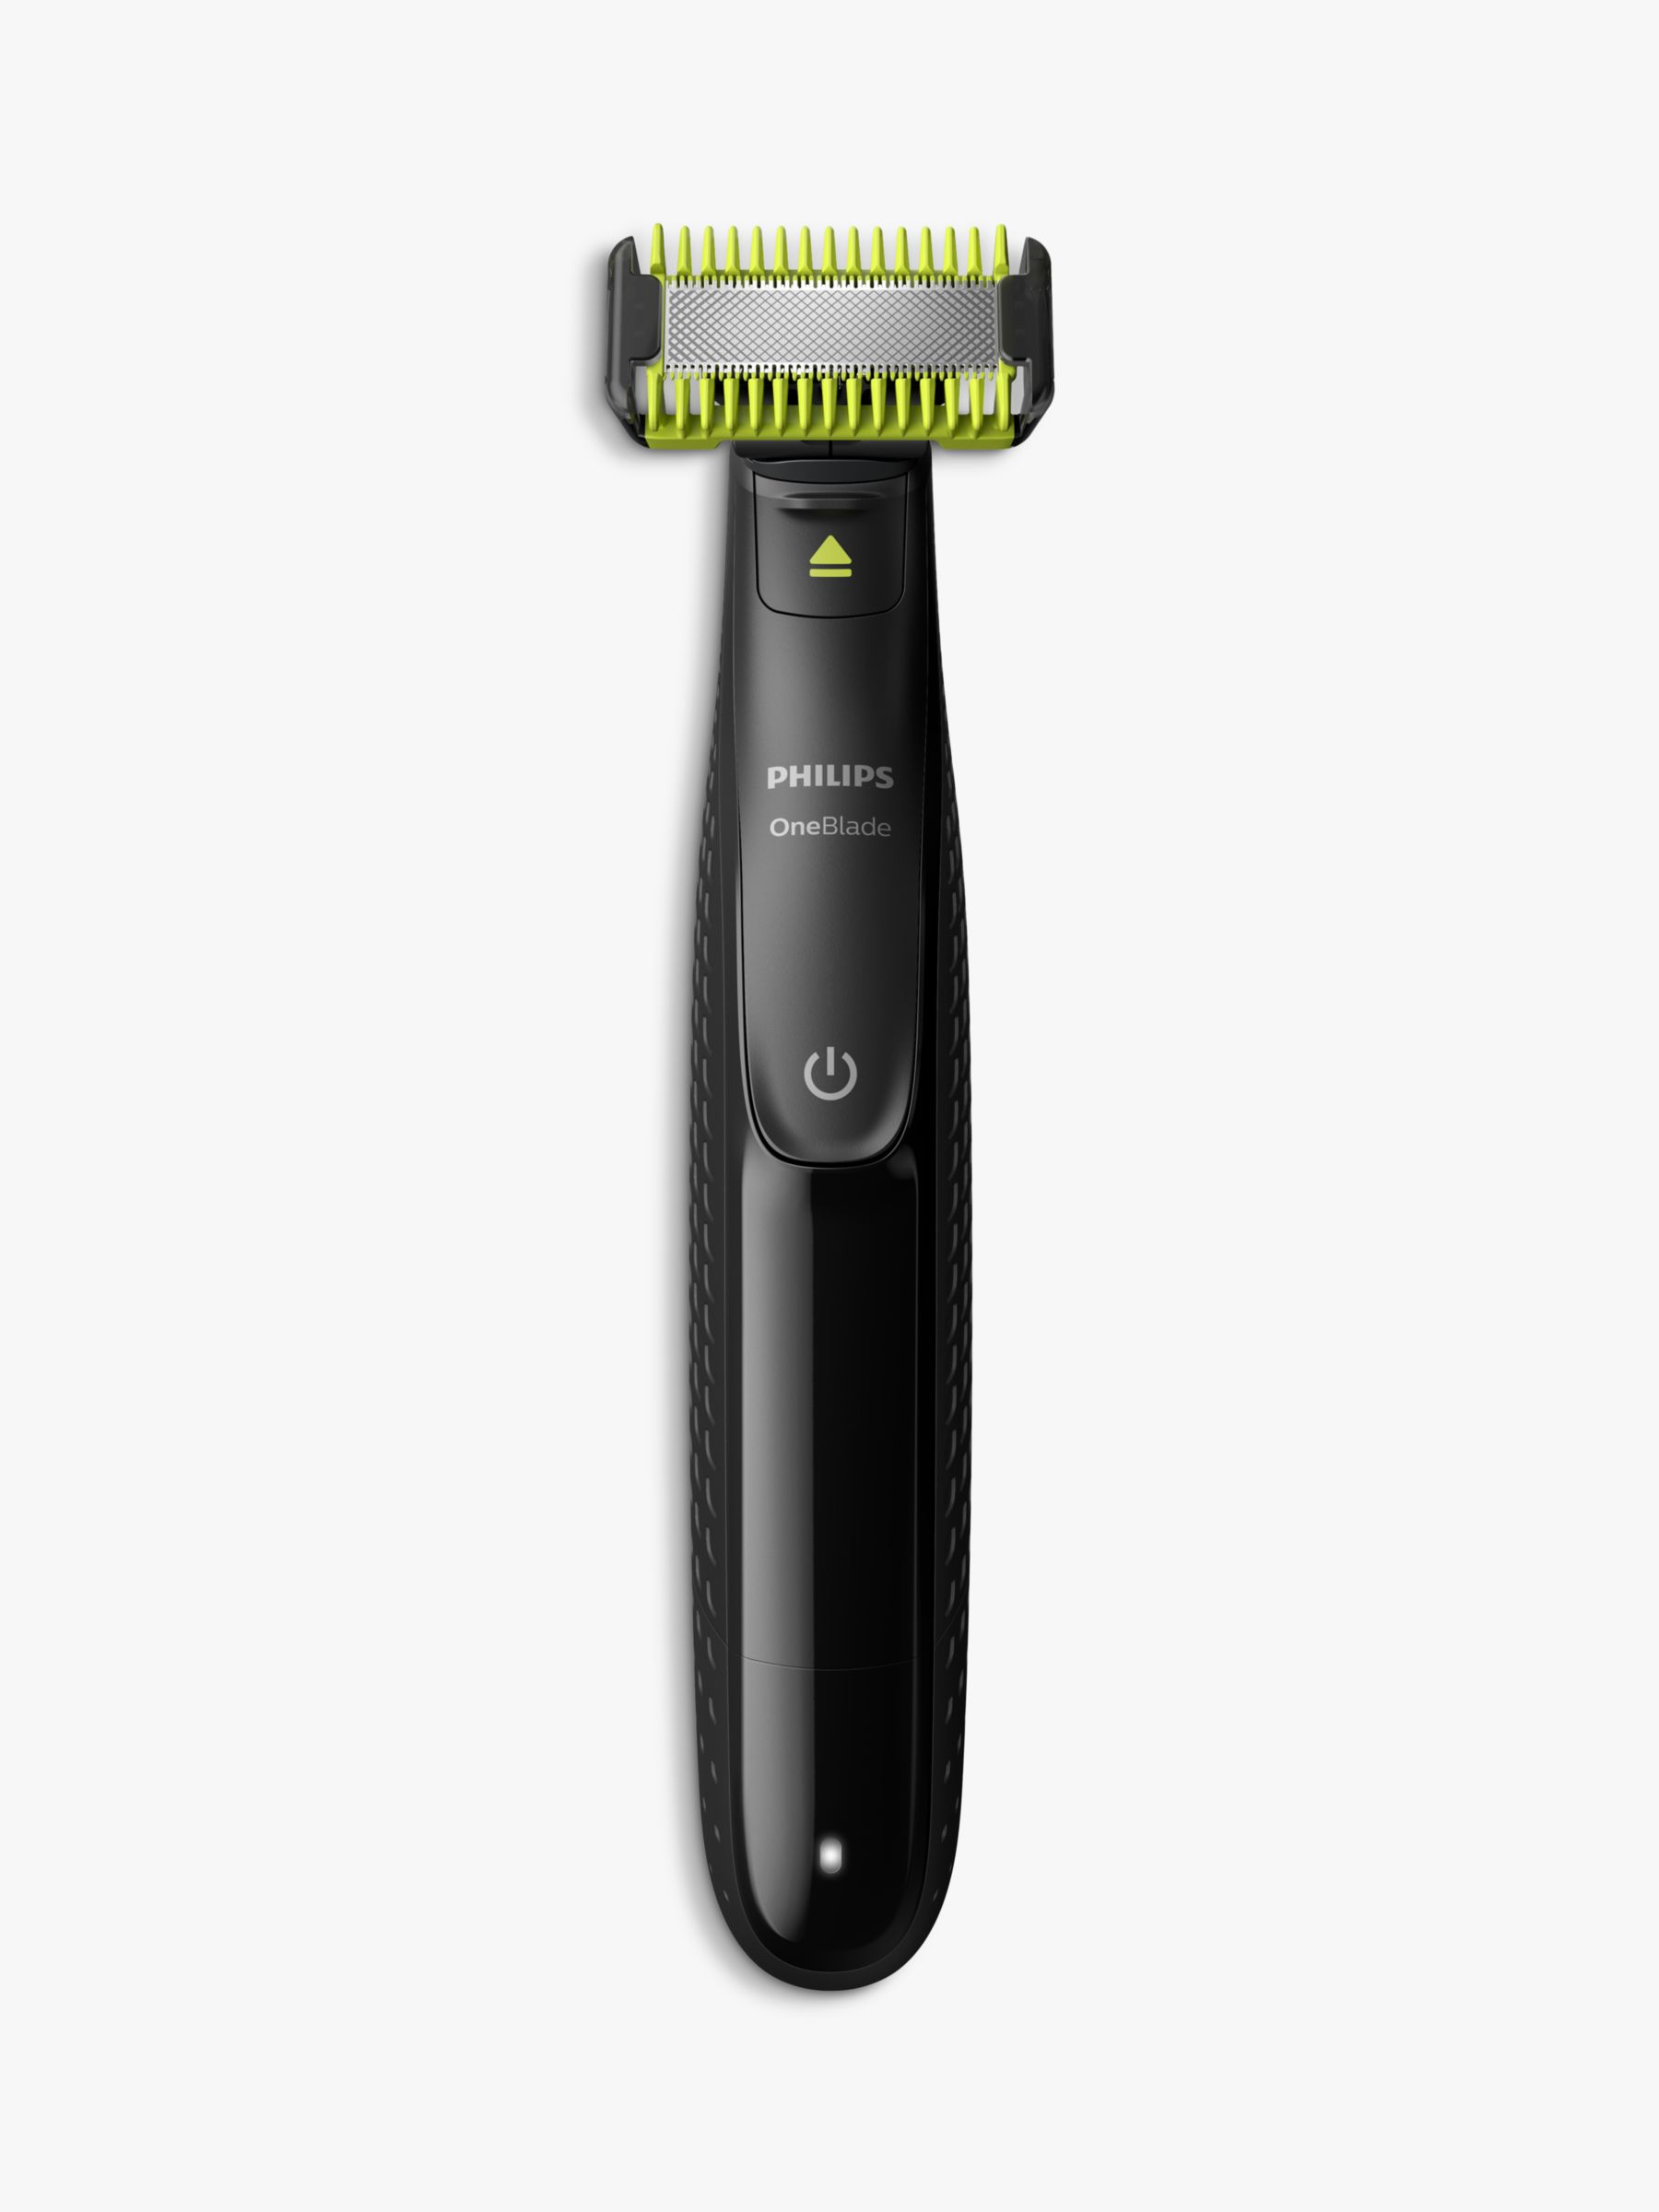 Philips MG9710/93 Series 9000 12-in-1 Multi Grooming Kit for Face, Hair and Body with OneBlade Bundle, Black/Silver